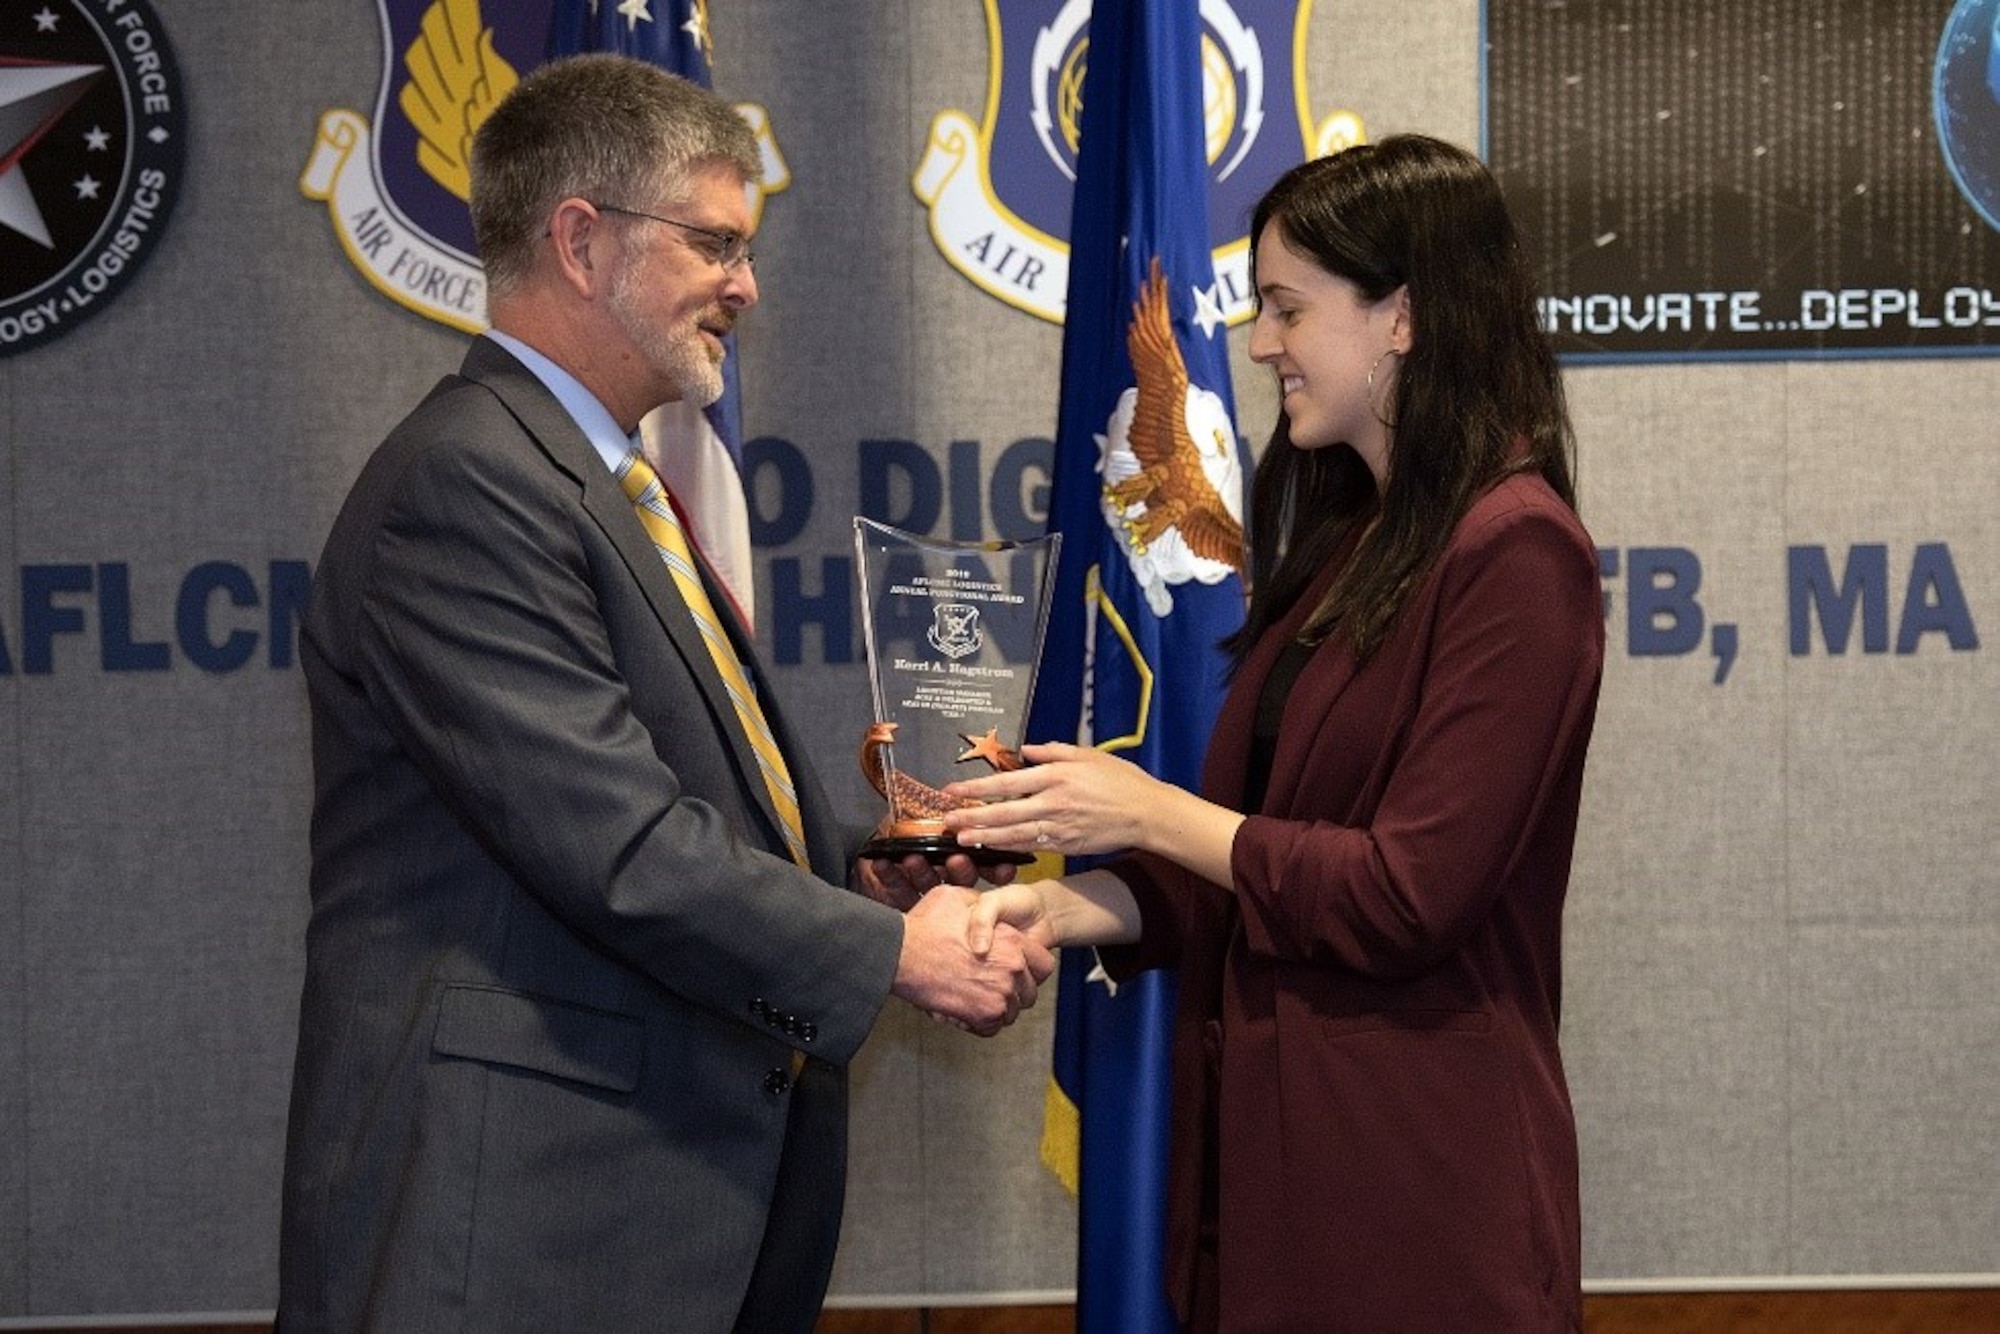 Scott Owens, deputy director of Command, Control, Communications, Intelligence and Networks Directorate, presents Kerri Hagstrom, C3I&N logistician, the Logistics Manager for ACAT I and II (non-flying) Tier I Award during an awards ceremony held at Wright-Patterson Air Force Base in Ohio and viewed by VTC at Hanscom Air Force Base, Mass., Feb.27. (U.S. Air Force photo by Jerry Saslav)